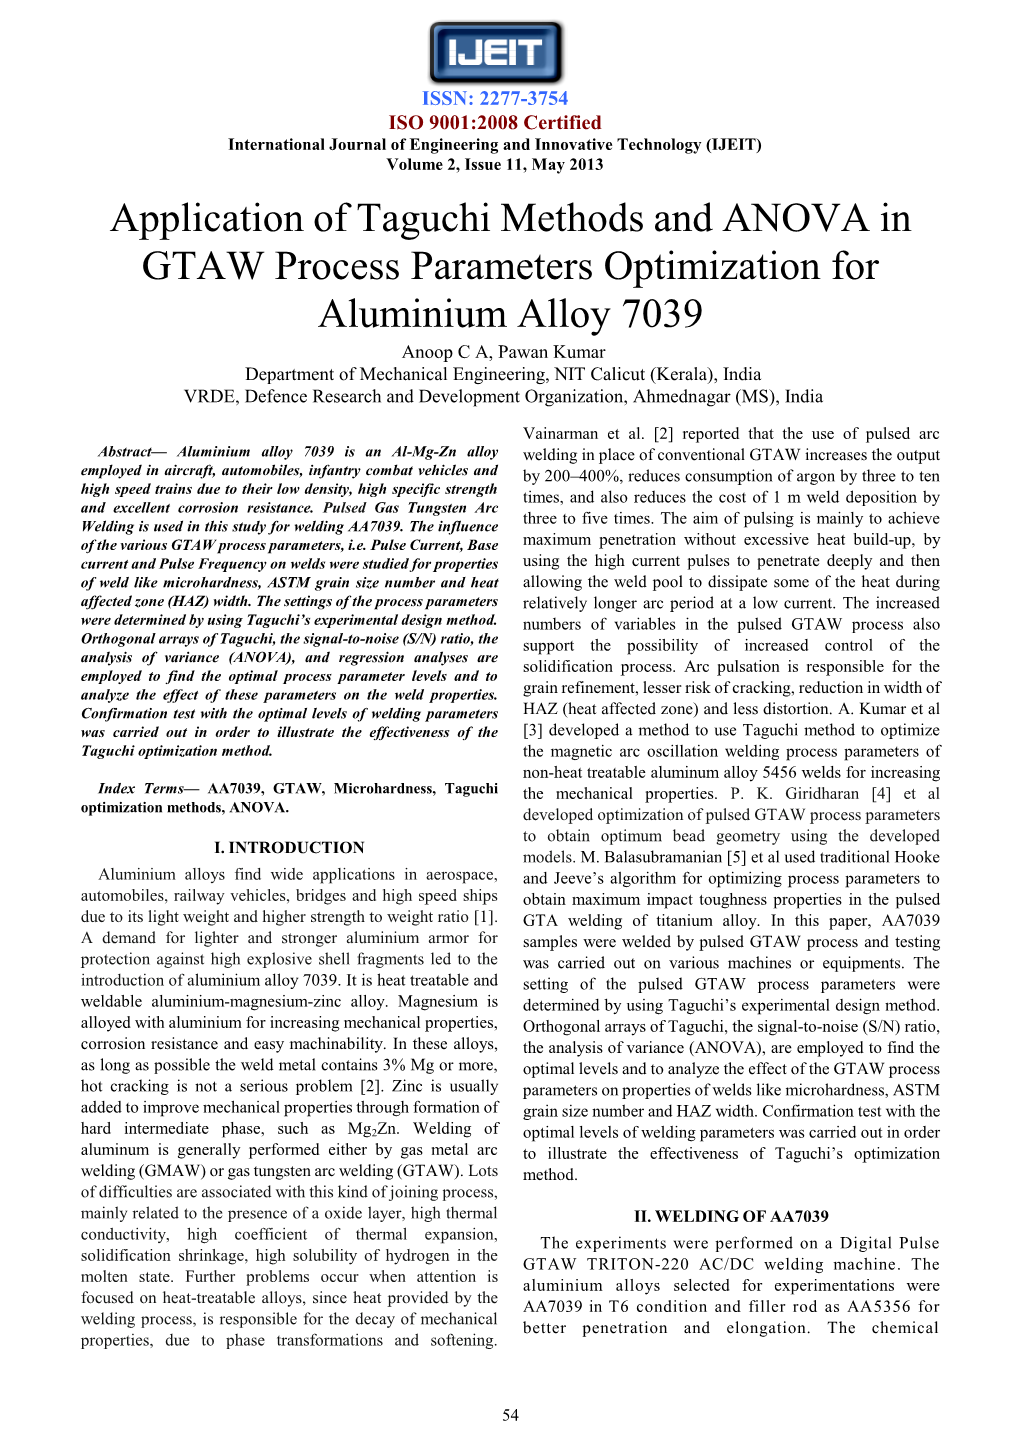 Application of Taguchi Methods and ANOVA in GTAW Process